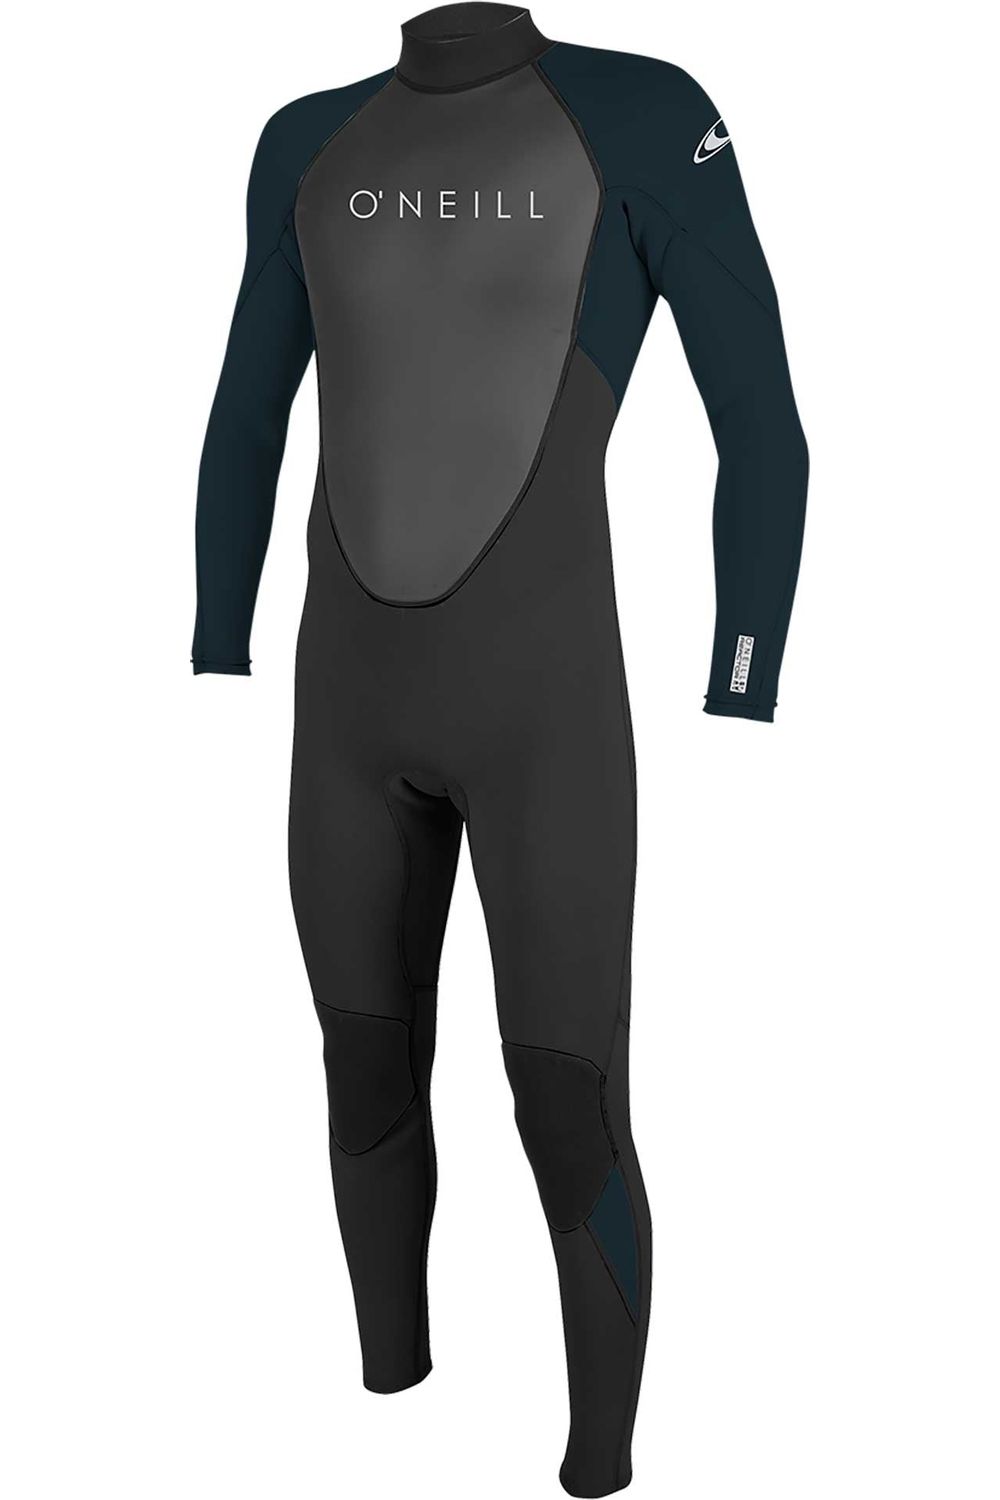 O'Neill Reactor 2 Wetsuit 3/2 With Back Zip In Black Abyss